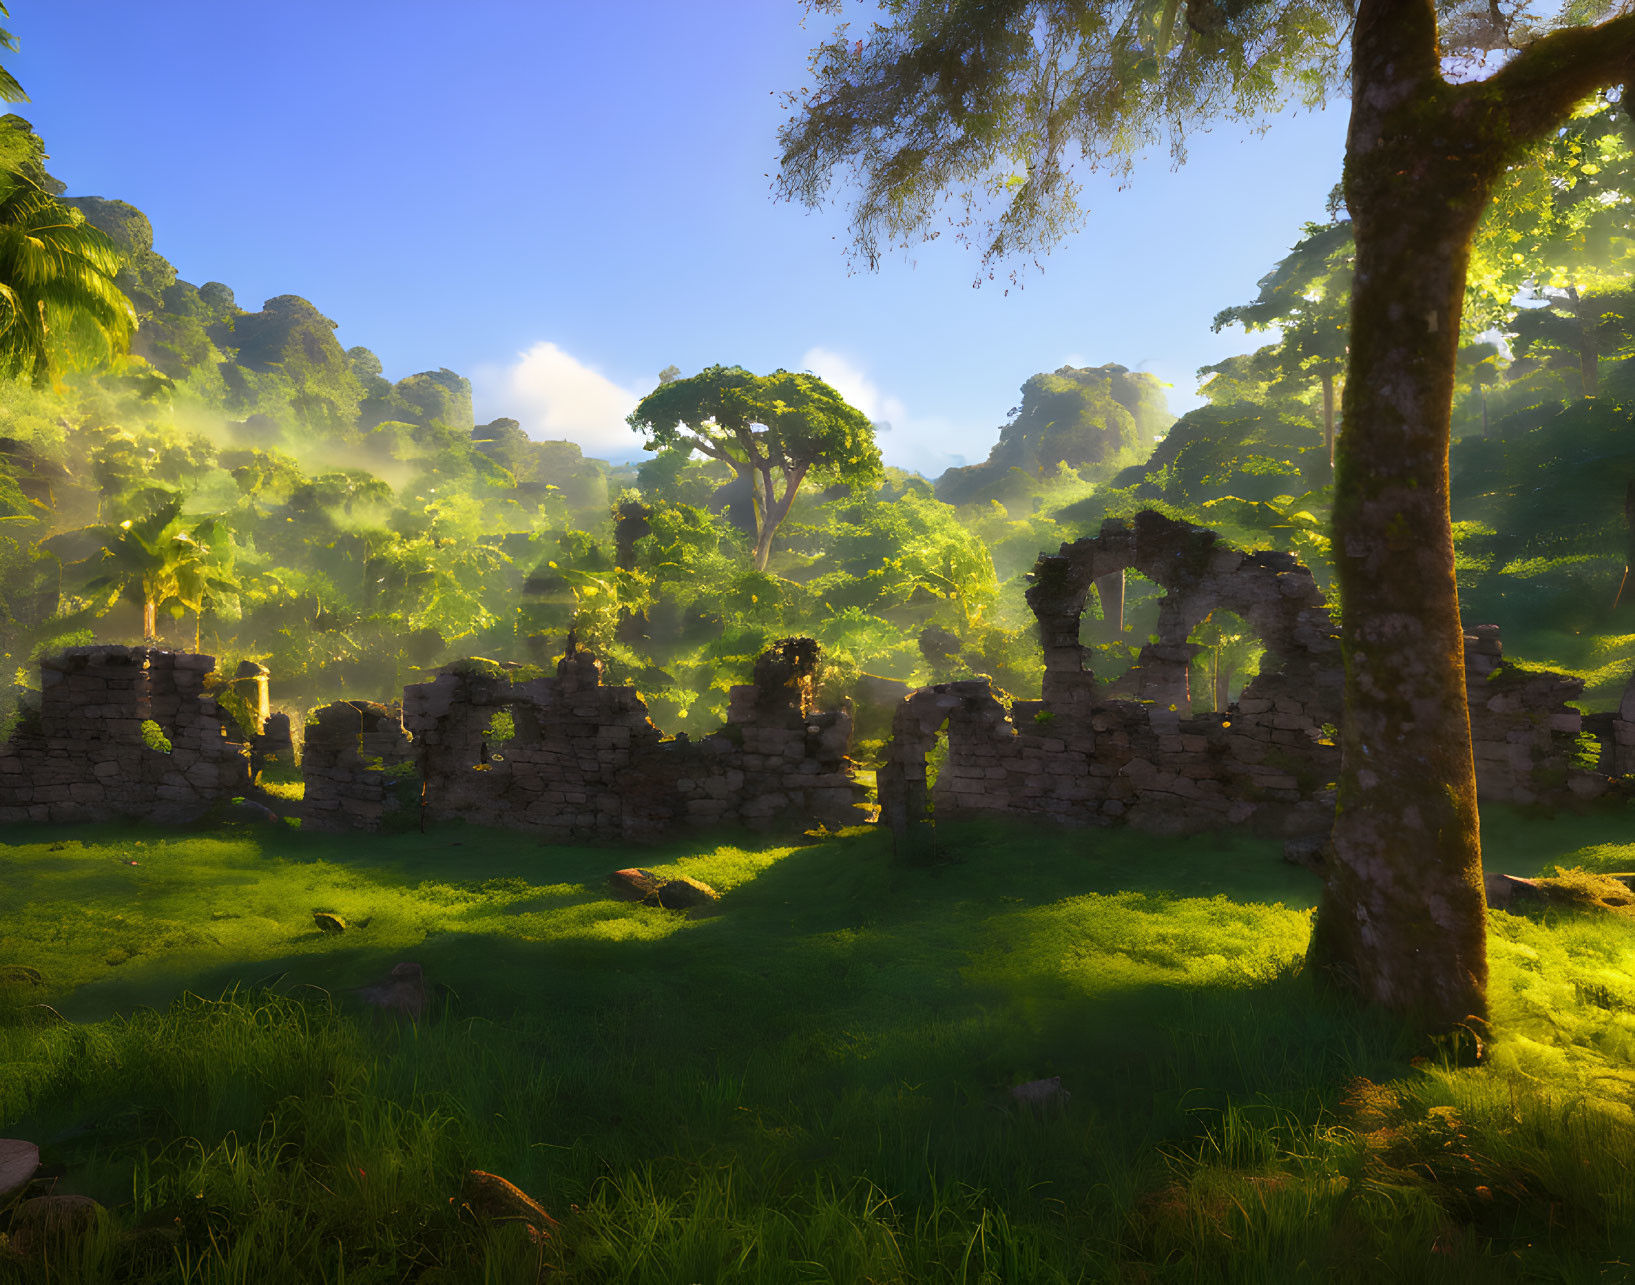 Sunlit forest clearing with stone ruins, green foliage, and mist.